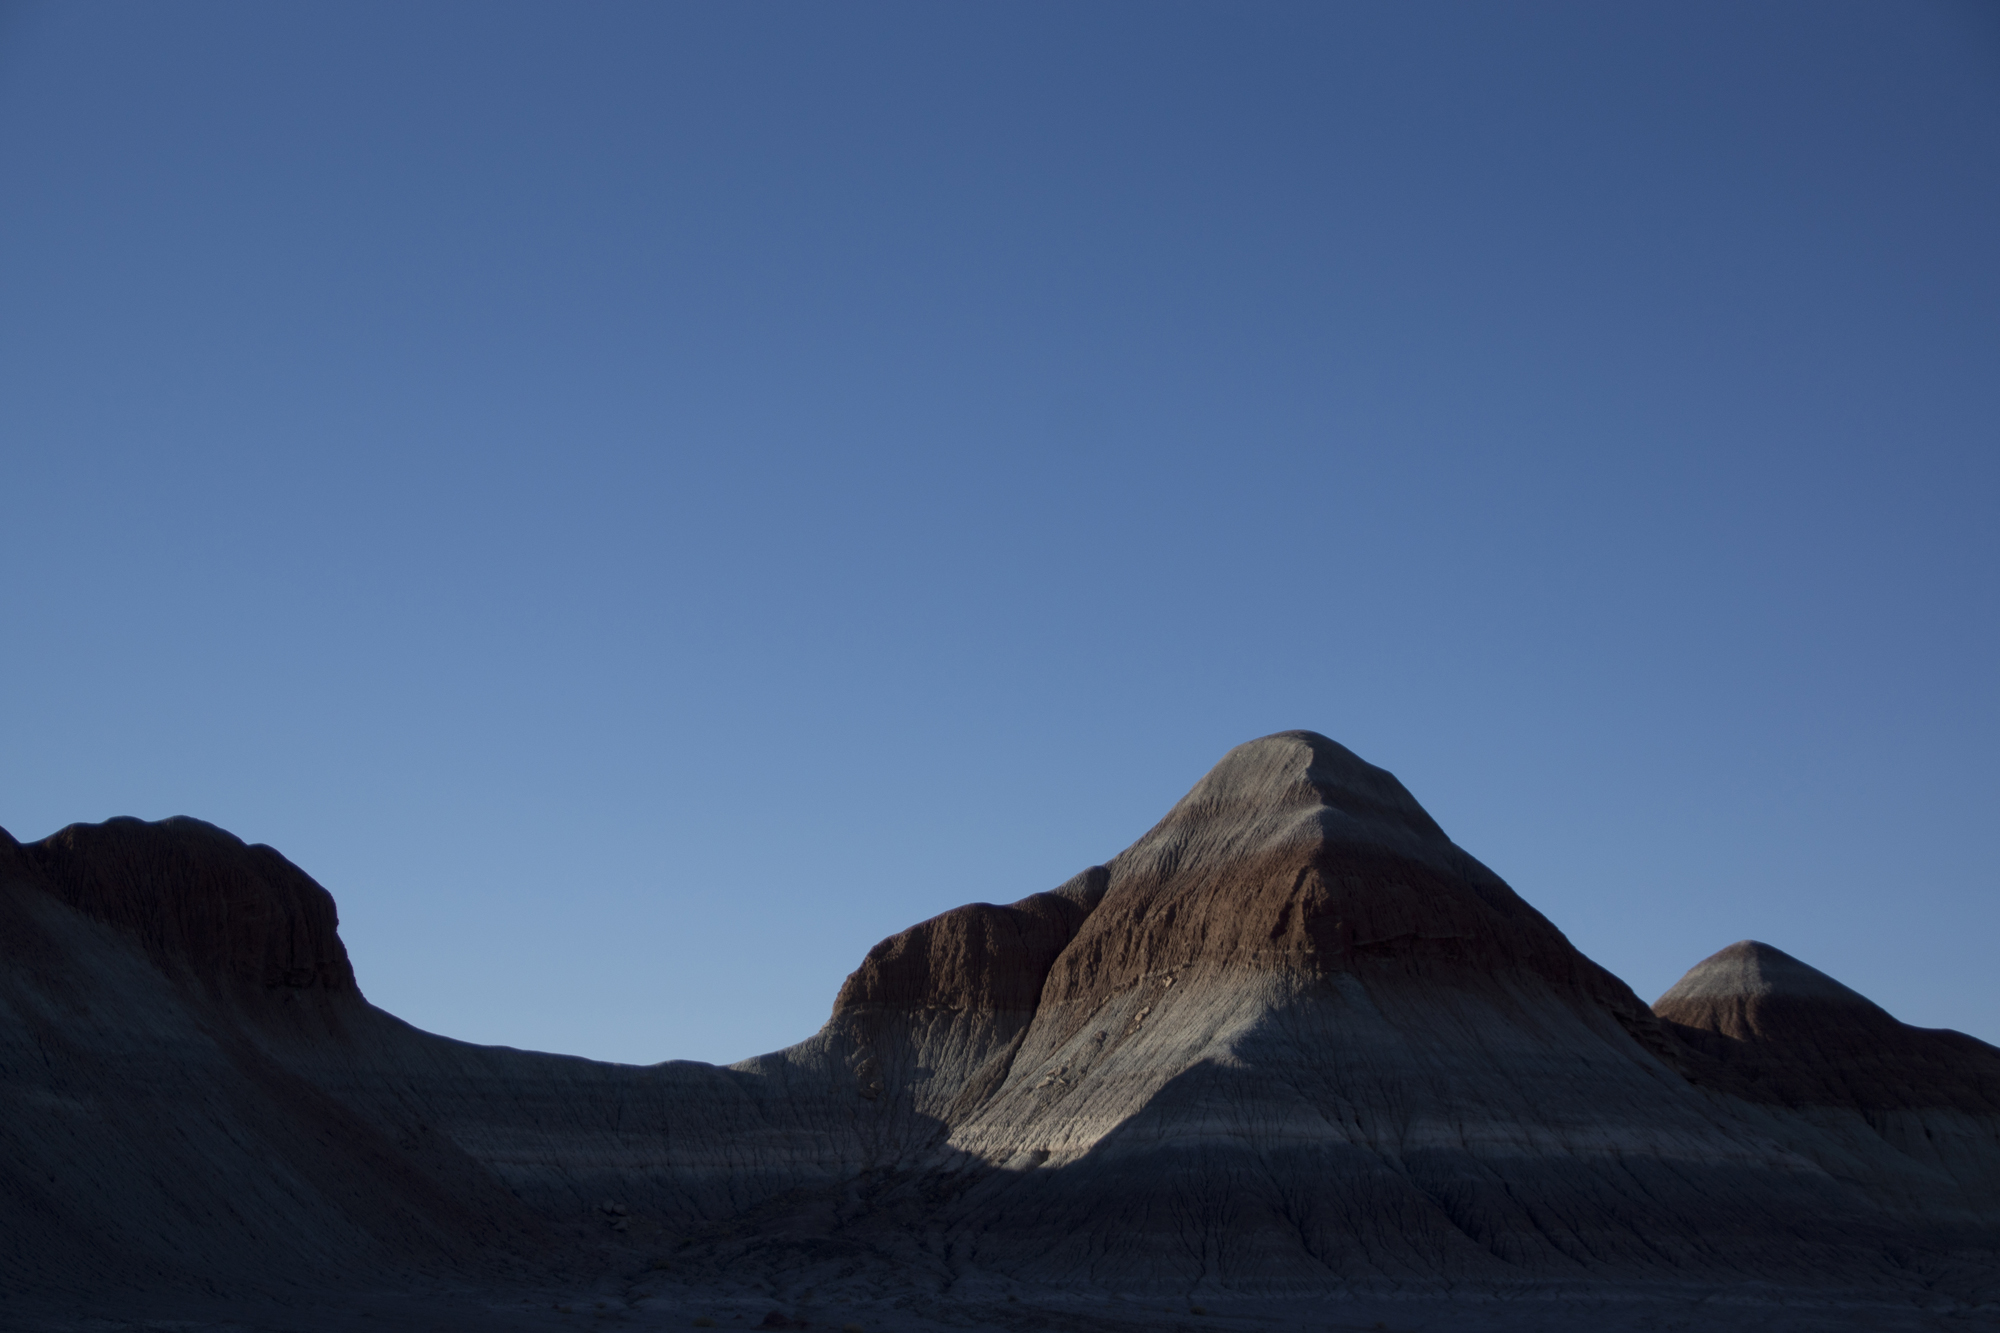  The Teepees, Petrified Forest National Park. 